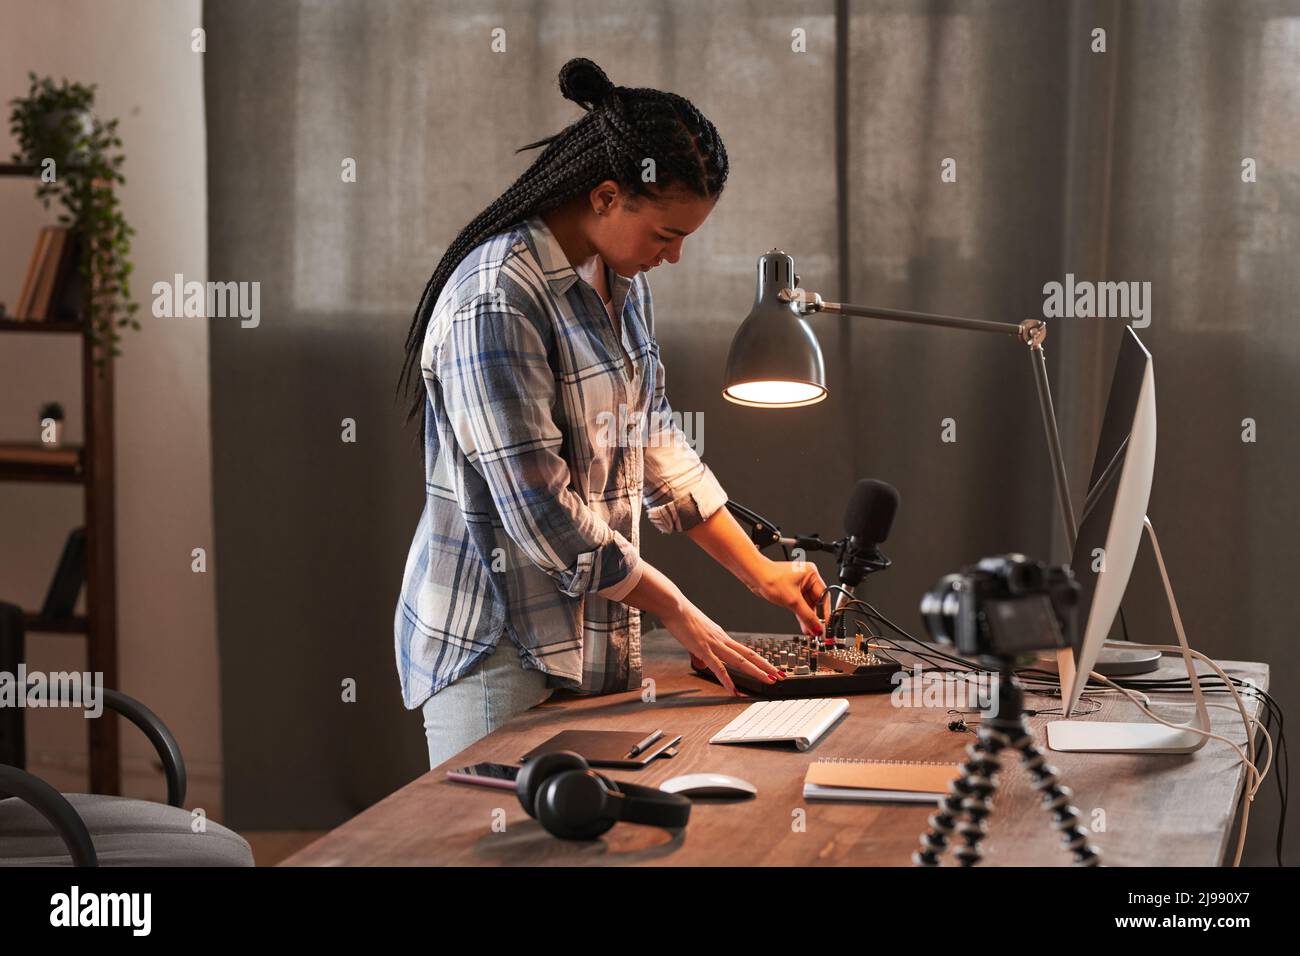 Stylish young woman standing at table in loft home office room setting and turning on microphone preparing for vlogging Stock Photo